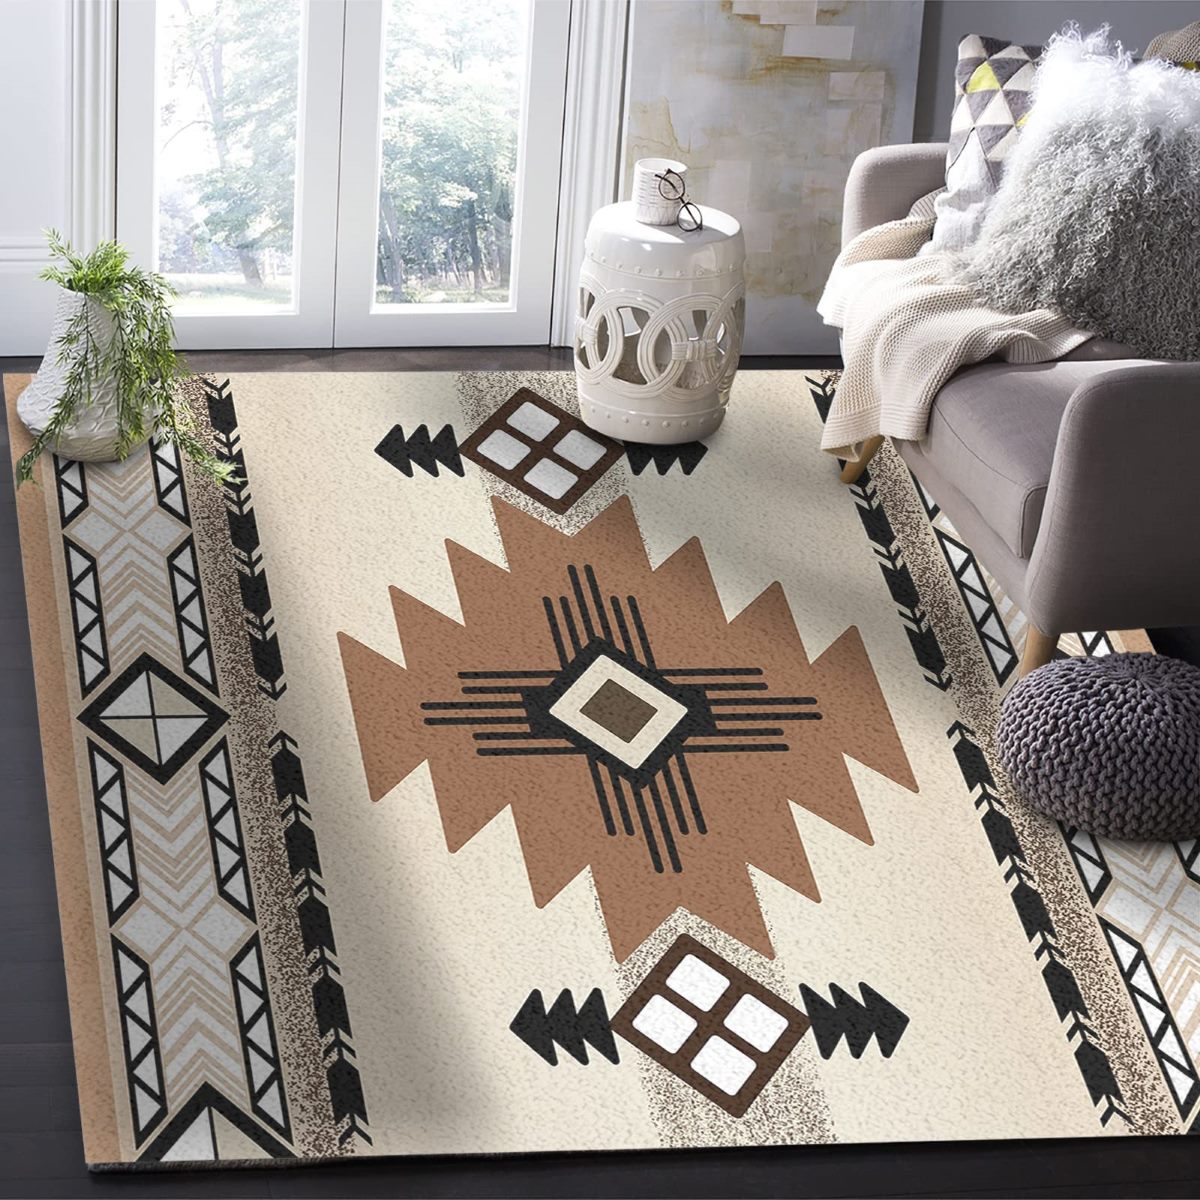 How Are Area Rugs Measured